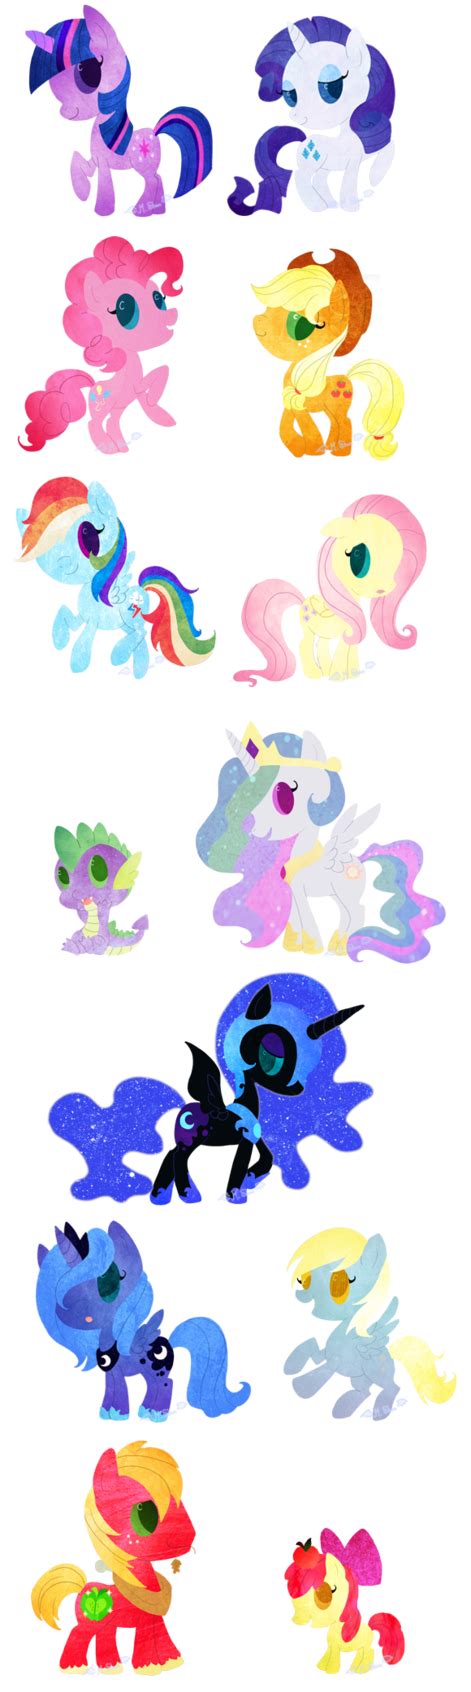 My Little Pony: FIM by LaPetitLapearl on deviantART | Mlp my little pony, Little pony, My little ...